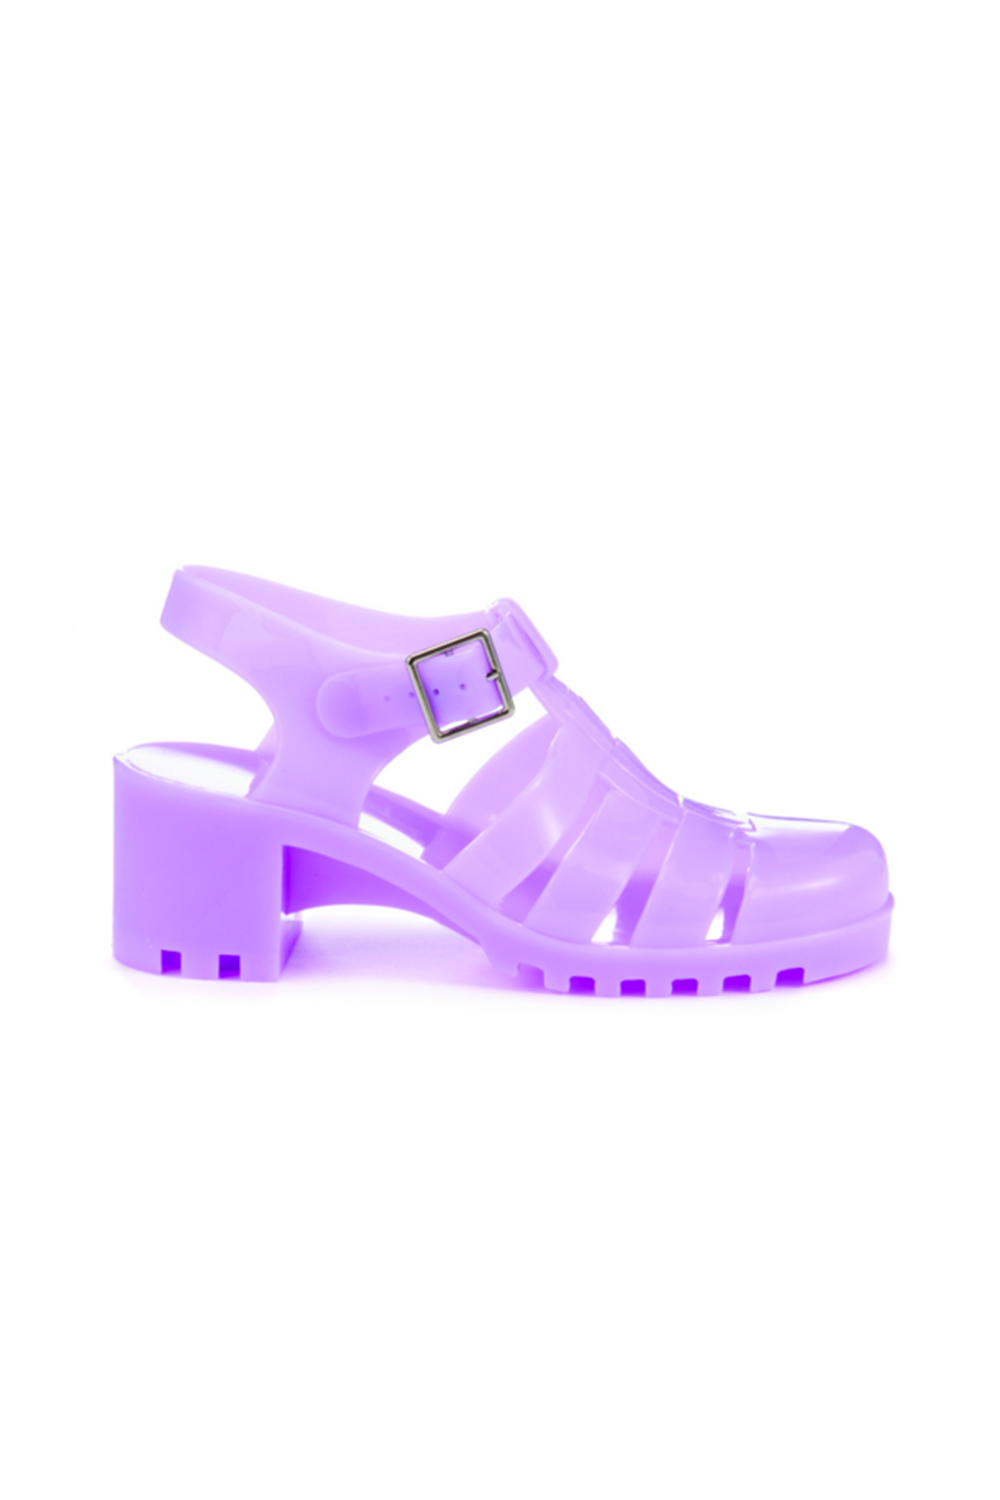 purple jelly shoes